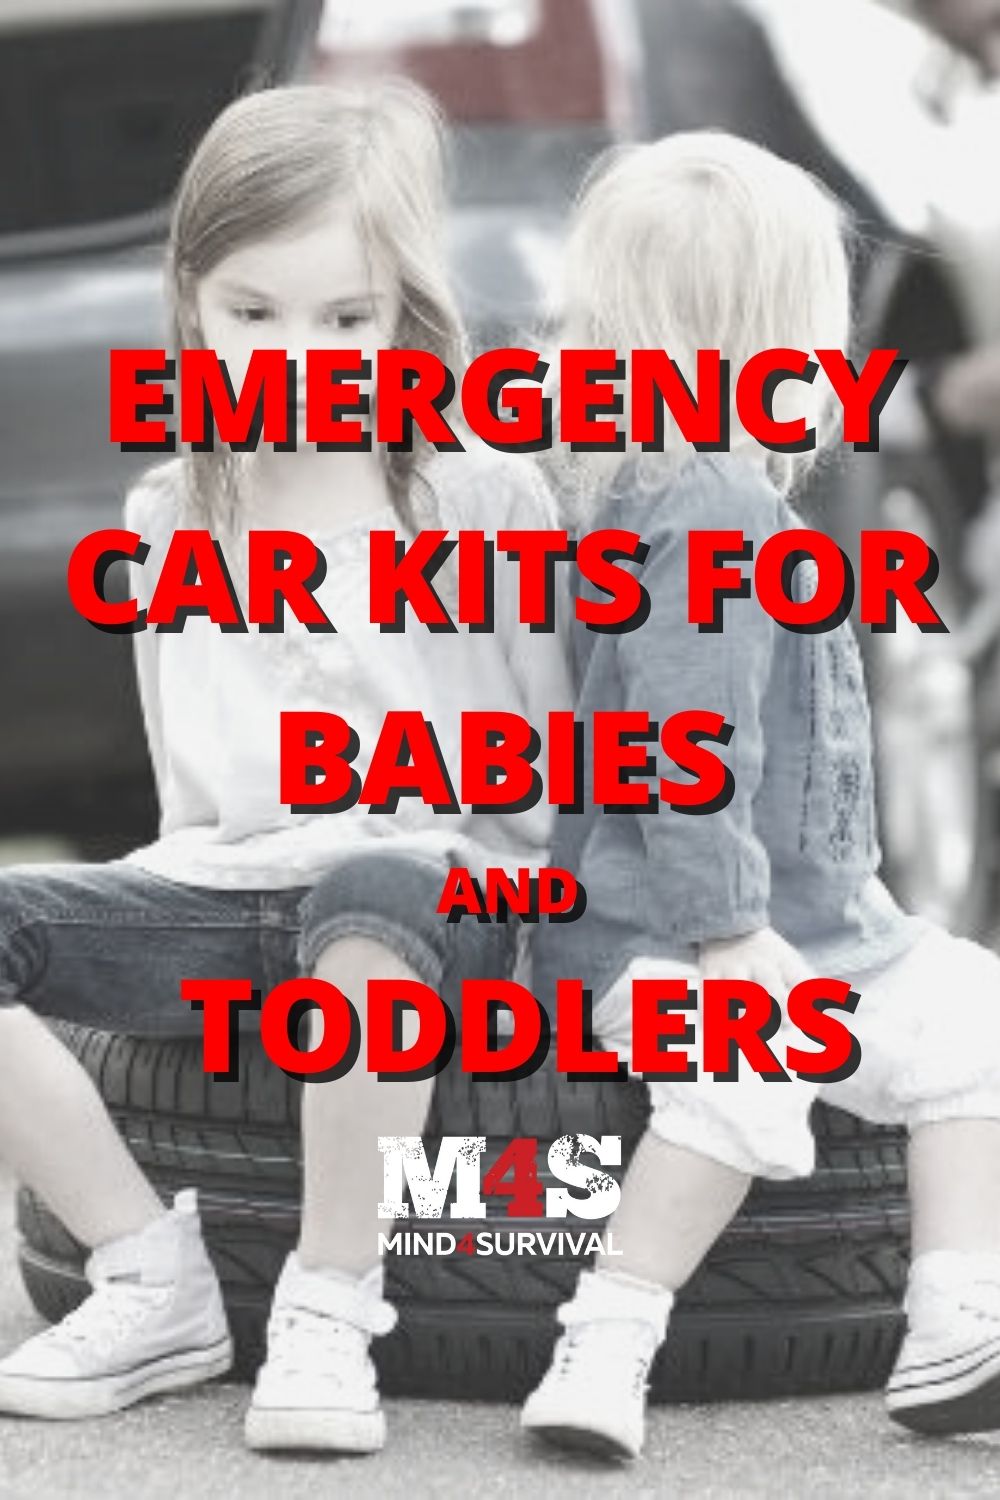 How to Create an Emergency Car Kit for Babies and Toddlers